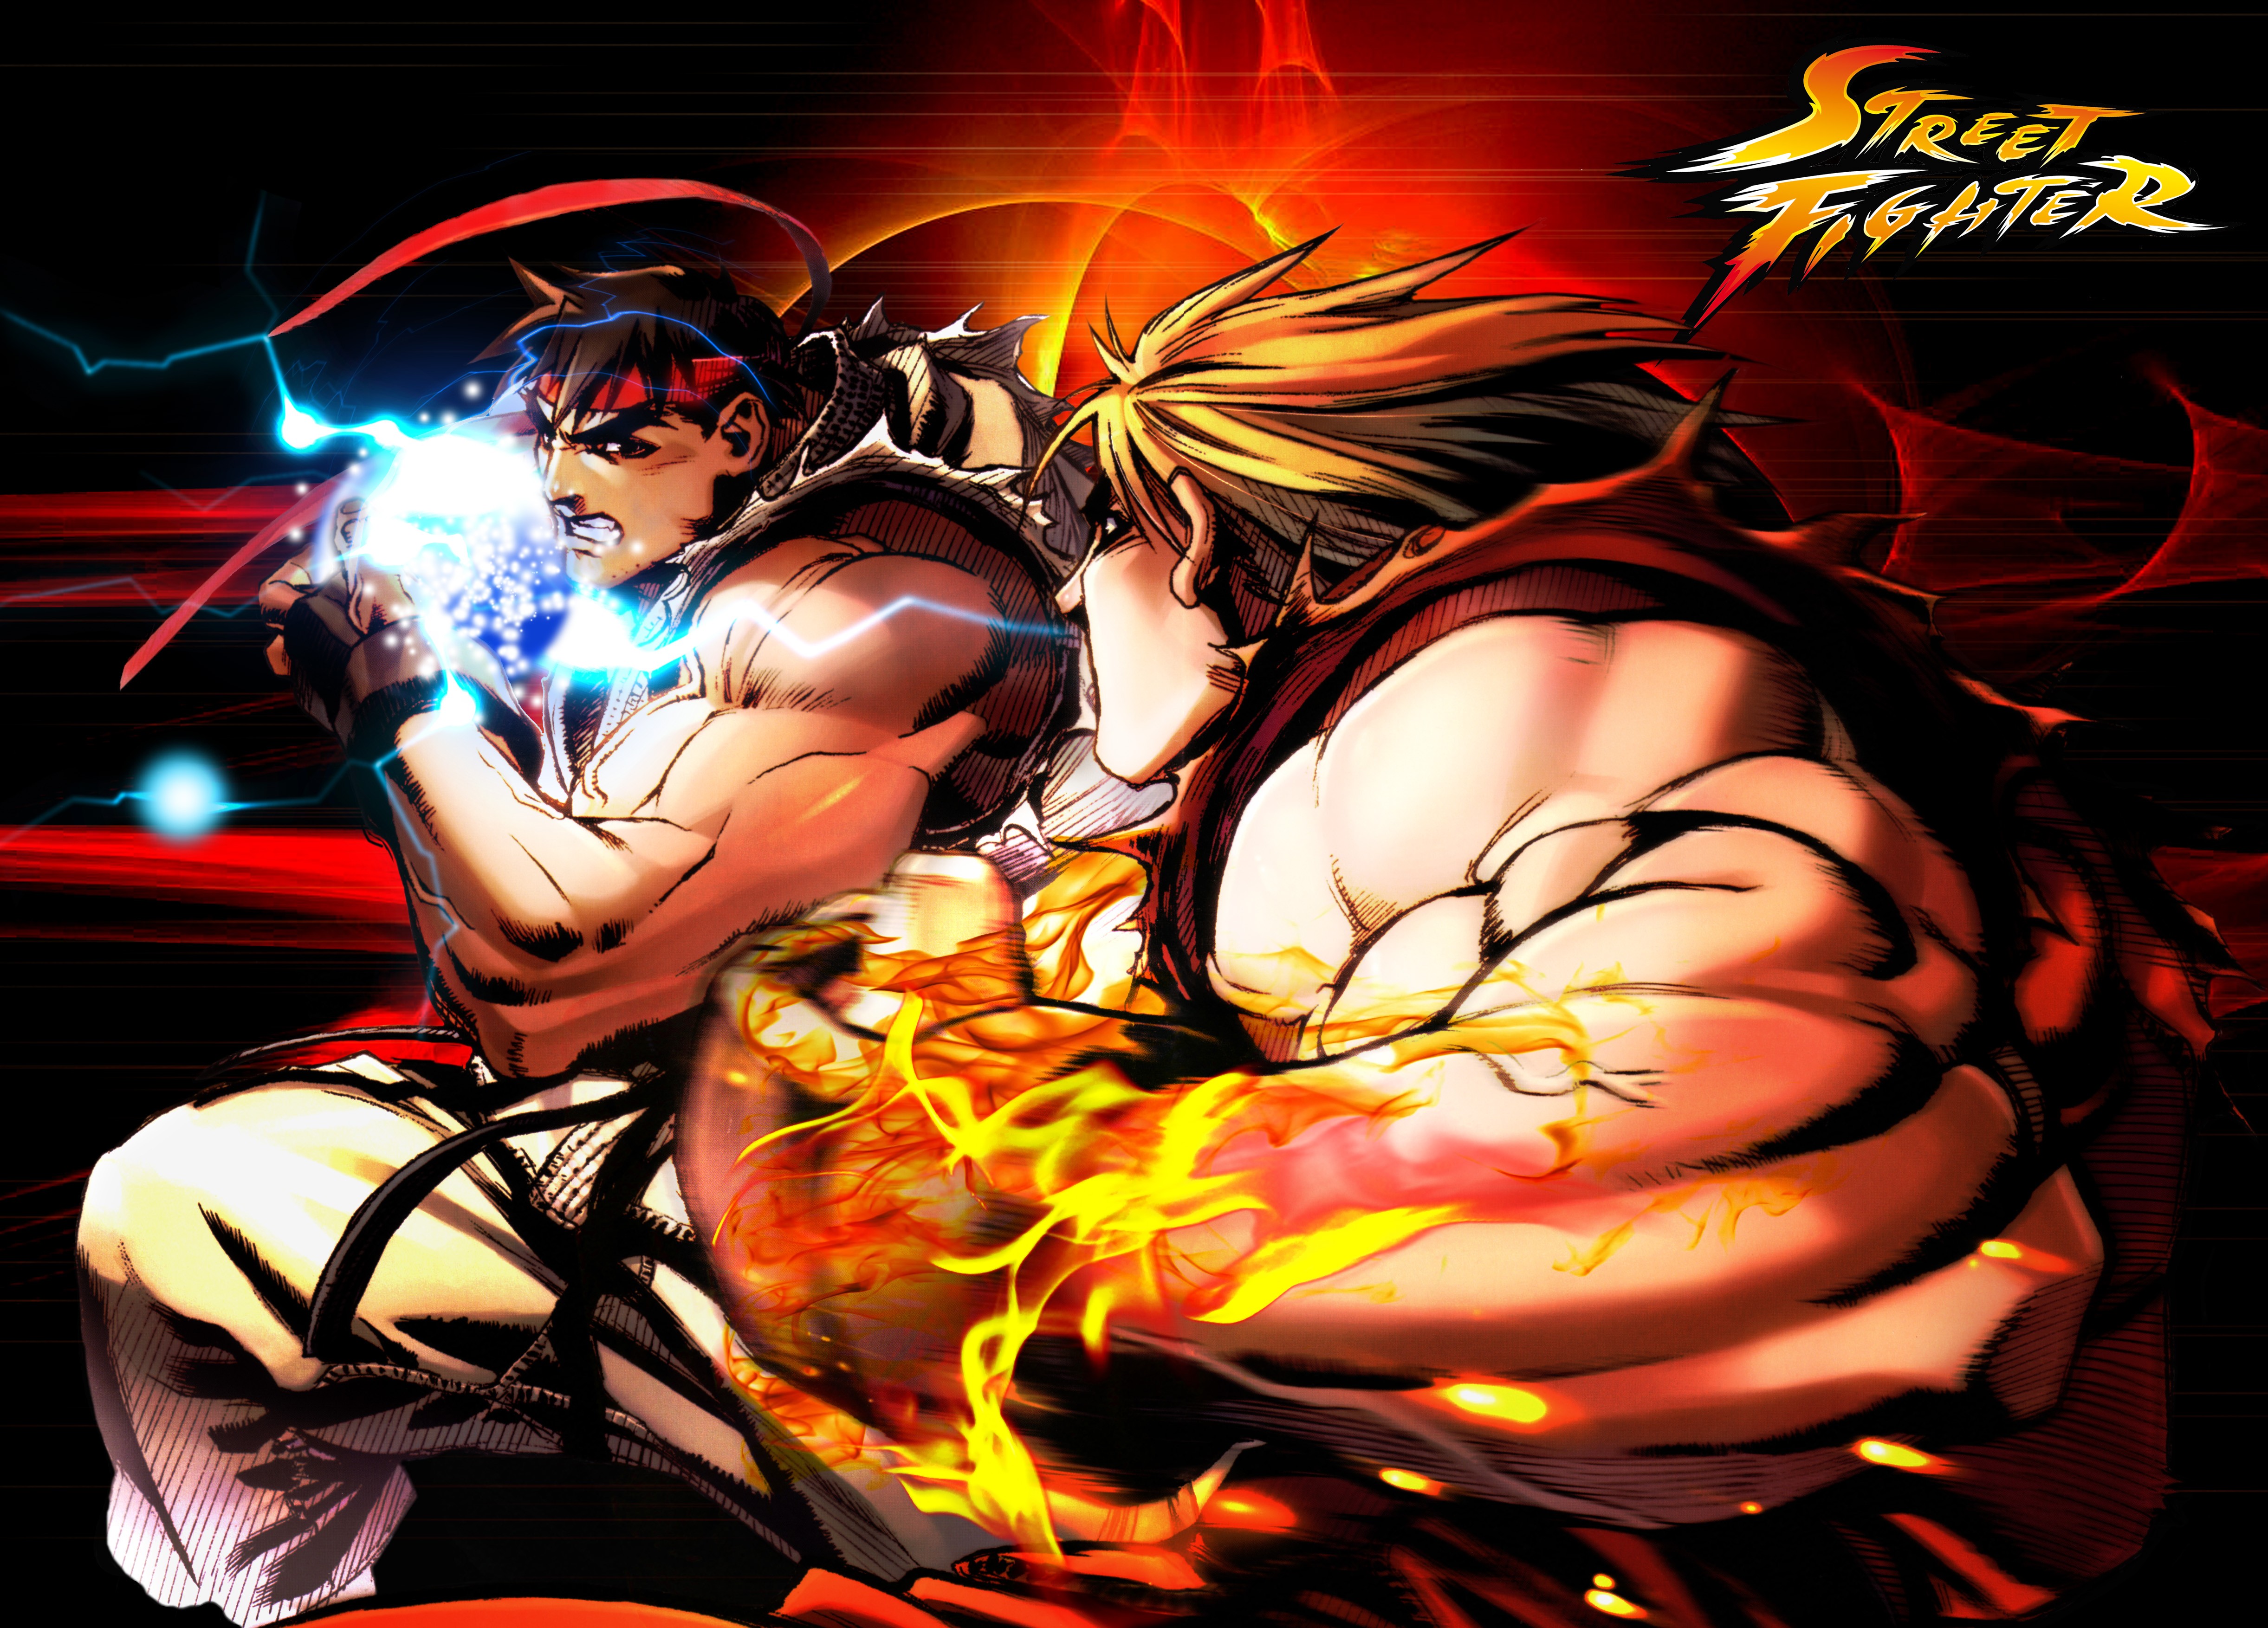 street fighter wallpaper,fictional character,justice league,anime,fiction,superhero